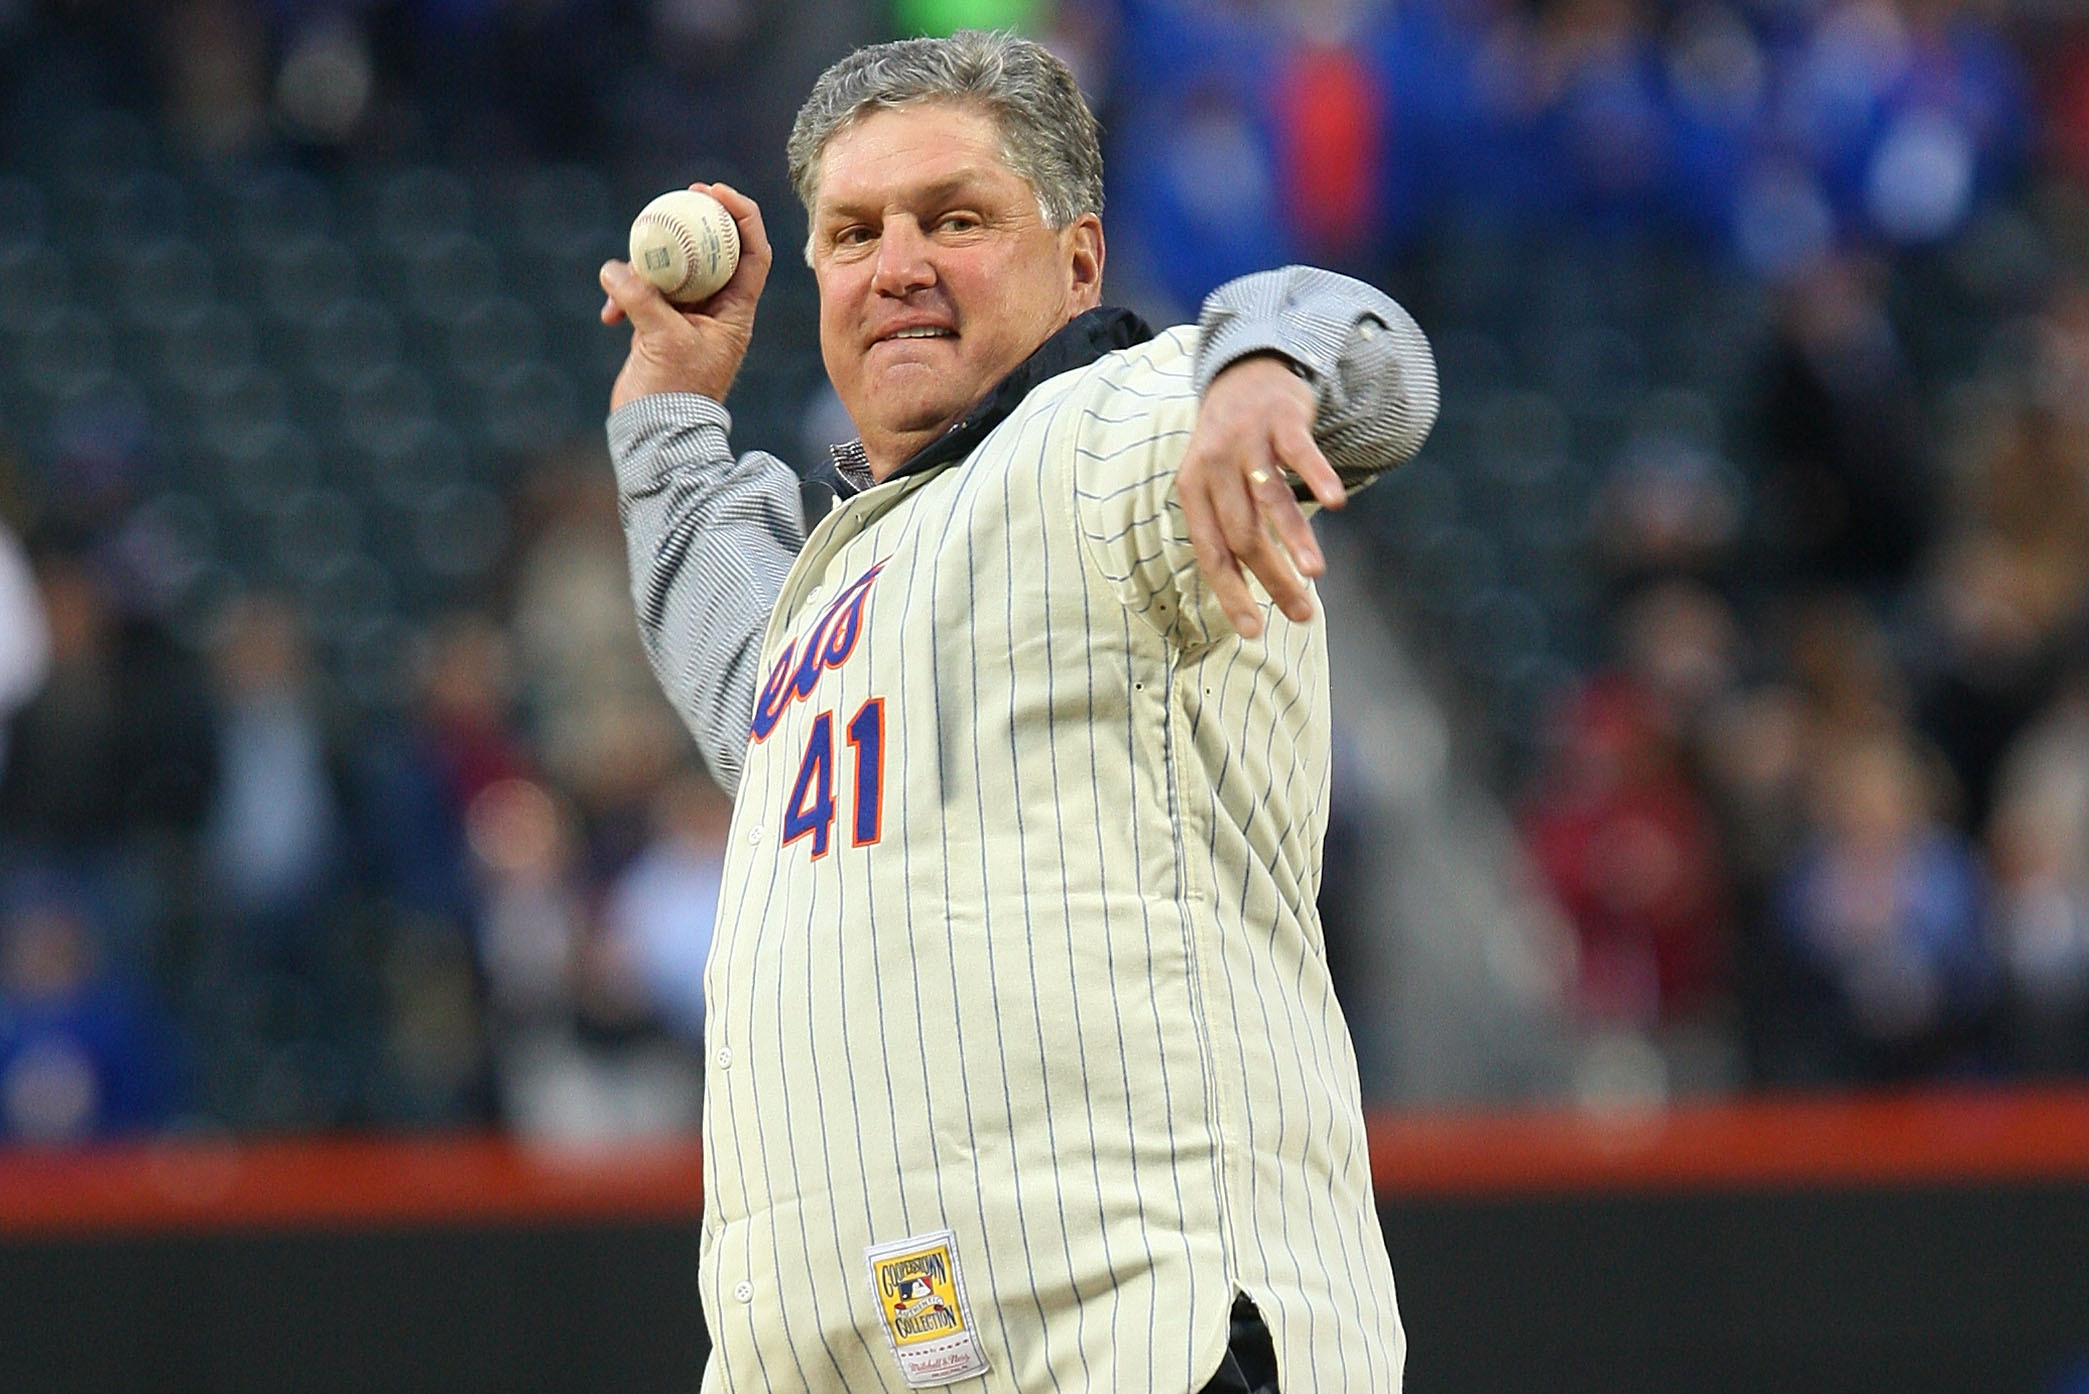 MLB Hall of Famer Tom Seaver diagnosed with dementia 